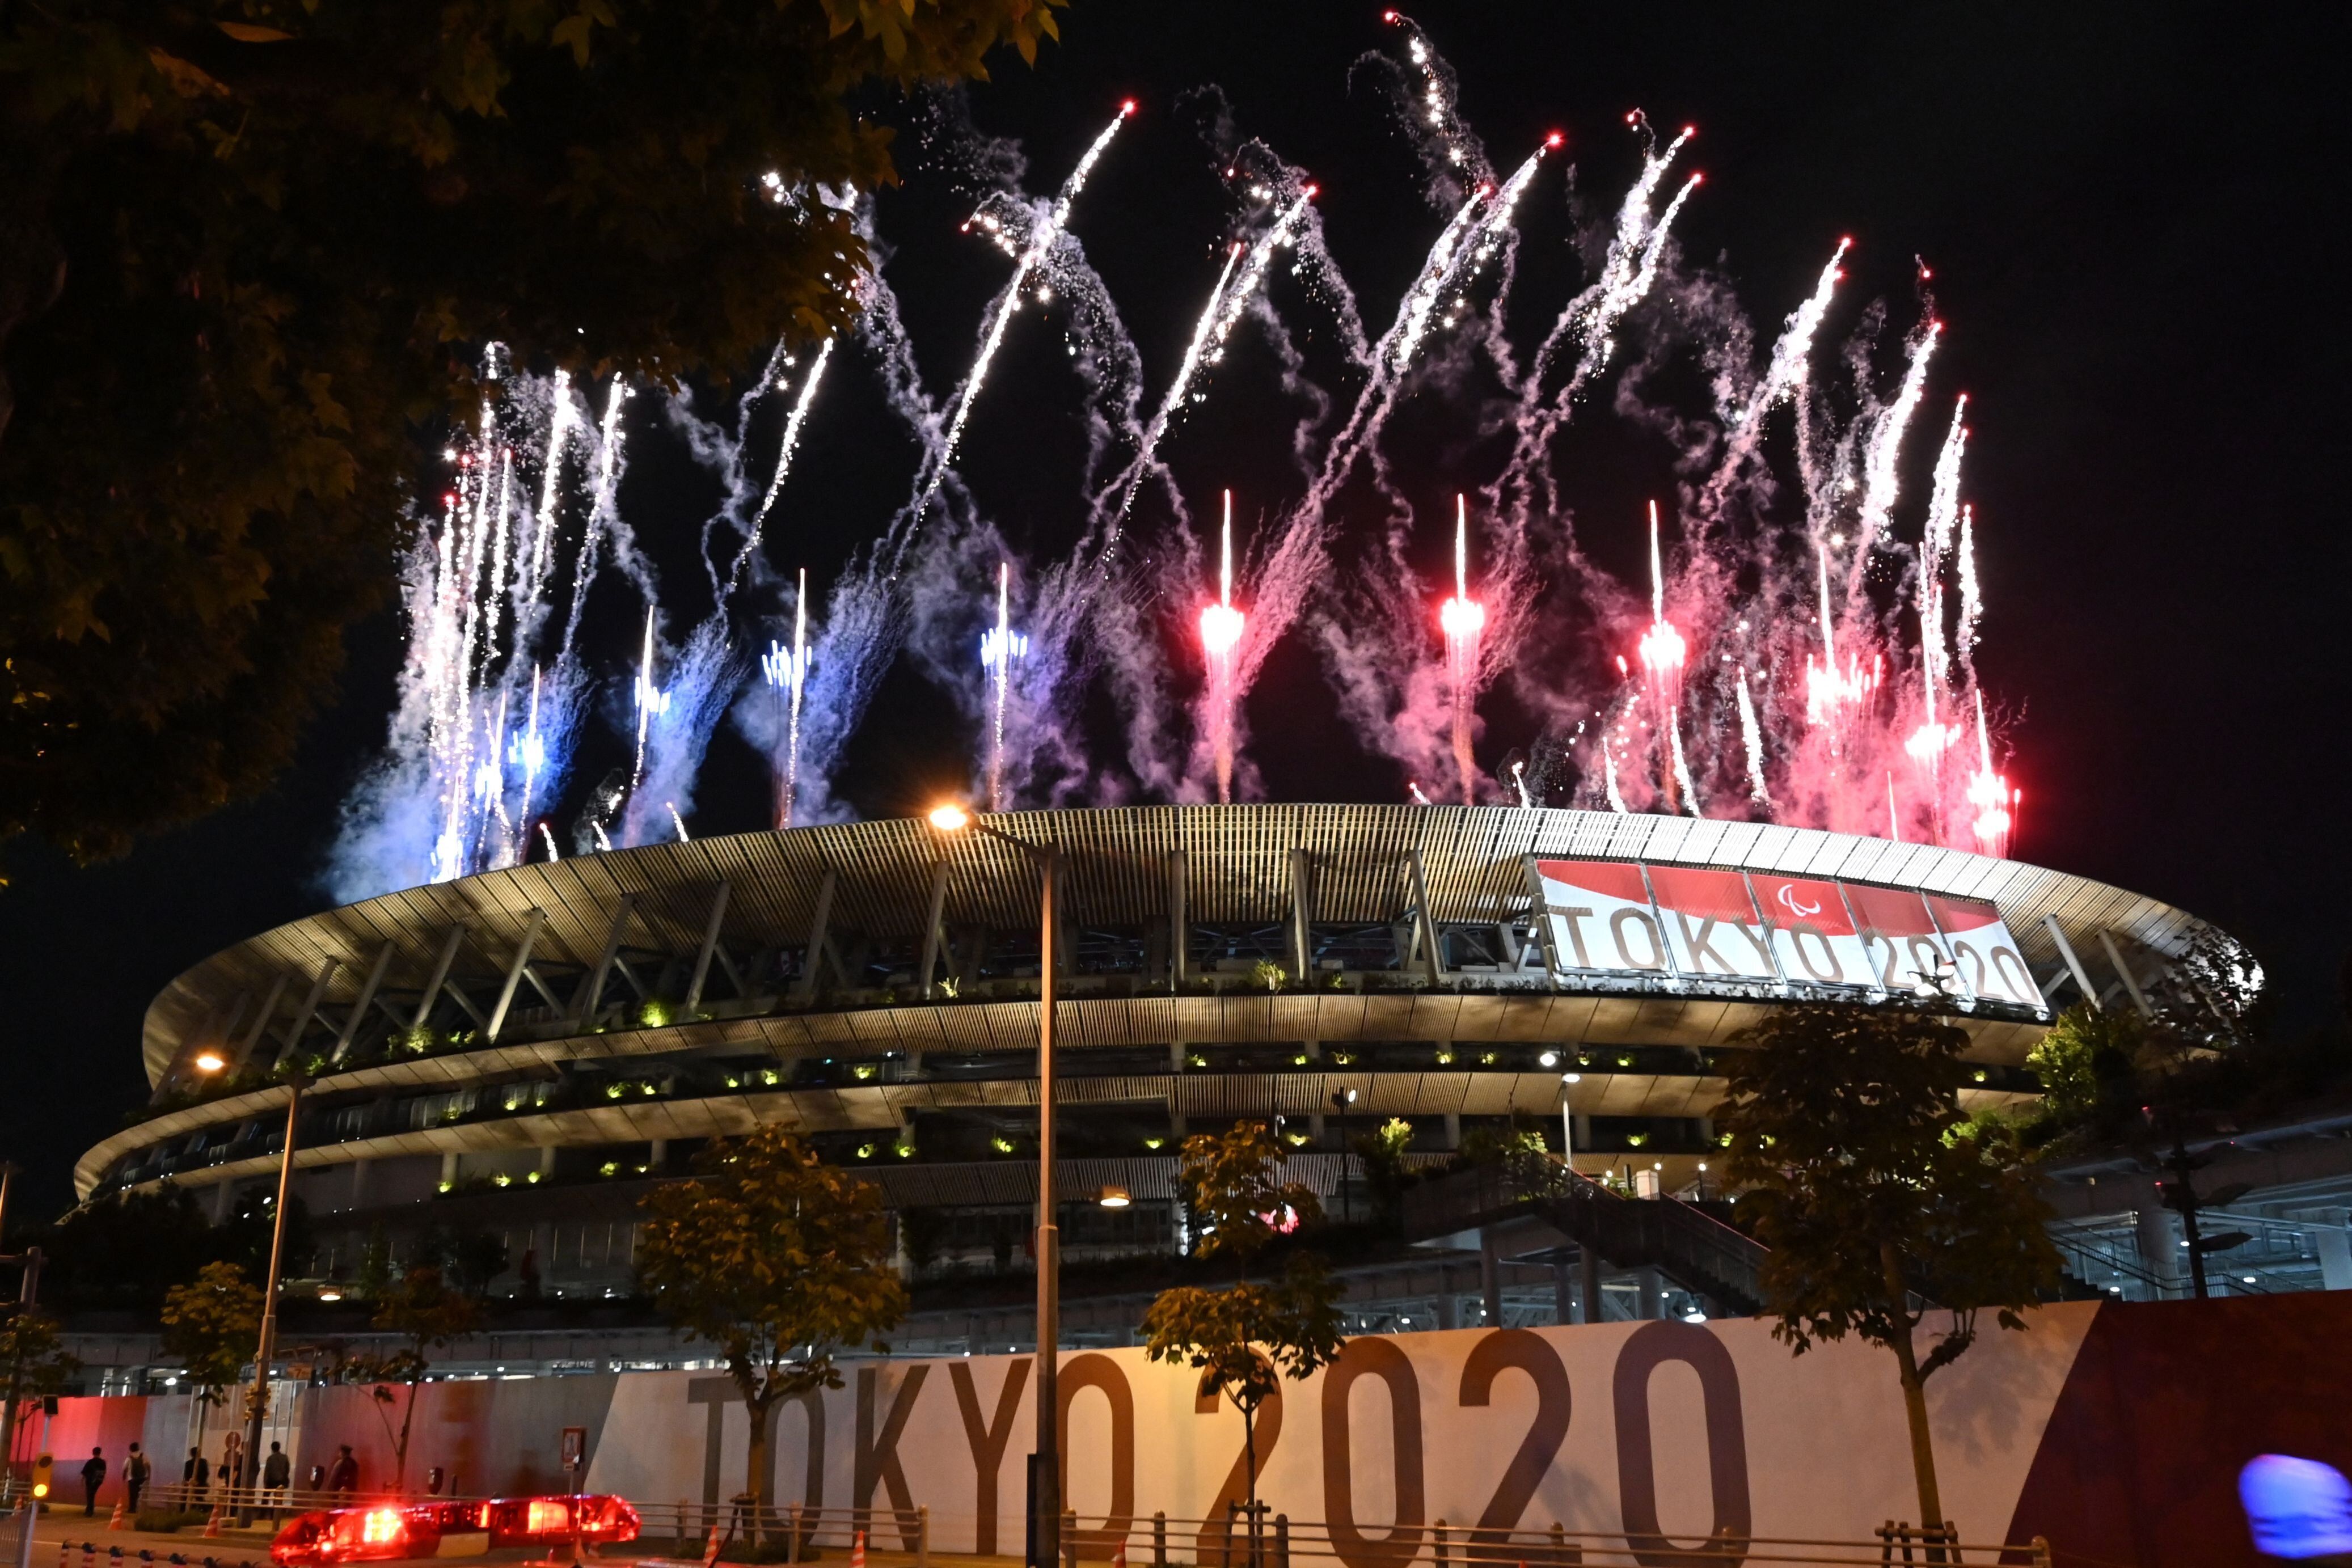 Fireworks light up the sky above the Olympic Stadium during the opening ceremony for the Tokyo 2020 Paralympic Games.